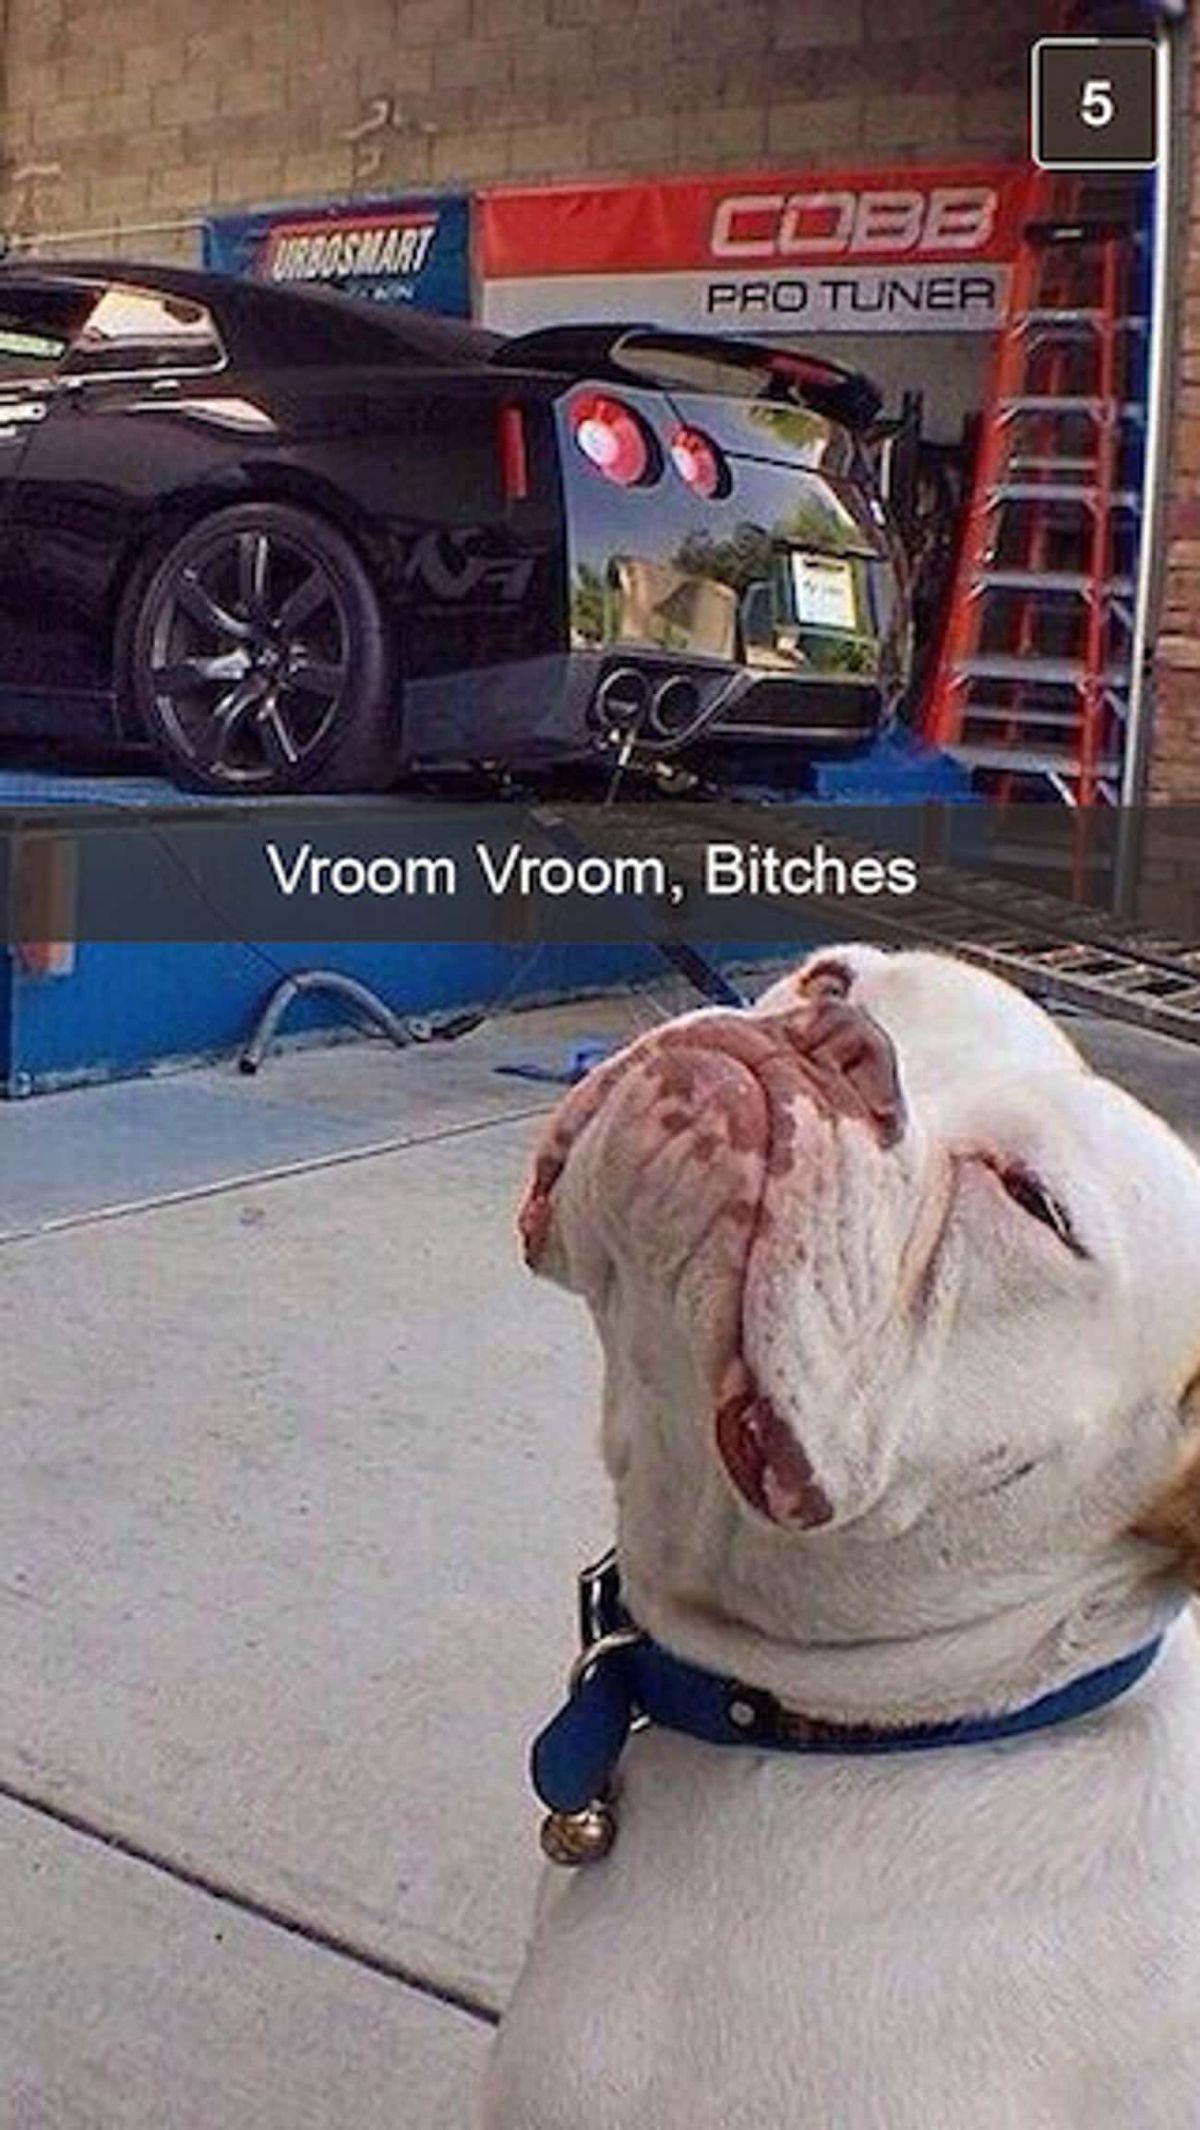 white bulldog sitting on ground looking up behind a black car in a garage with the caption Vroom Vroom, Bitches